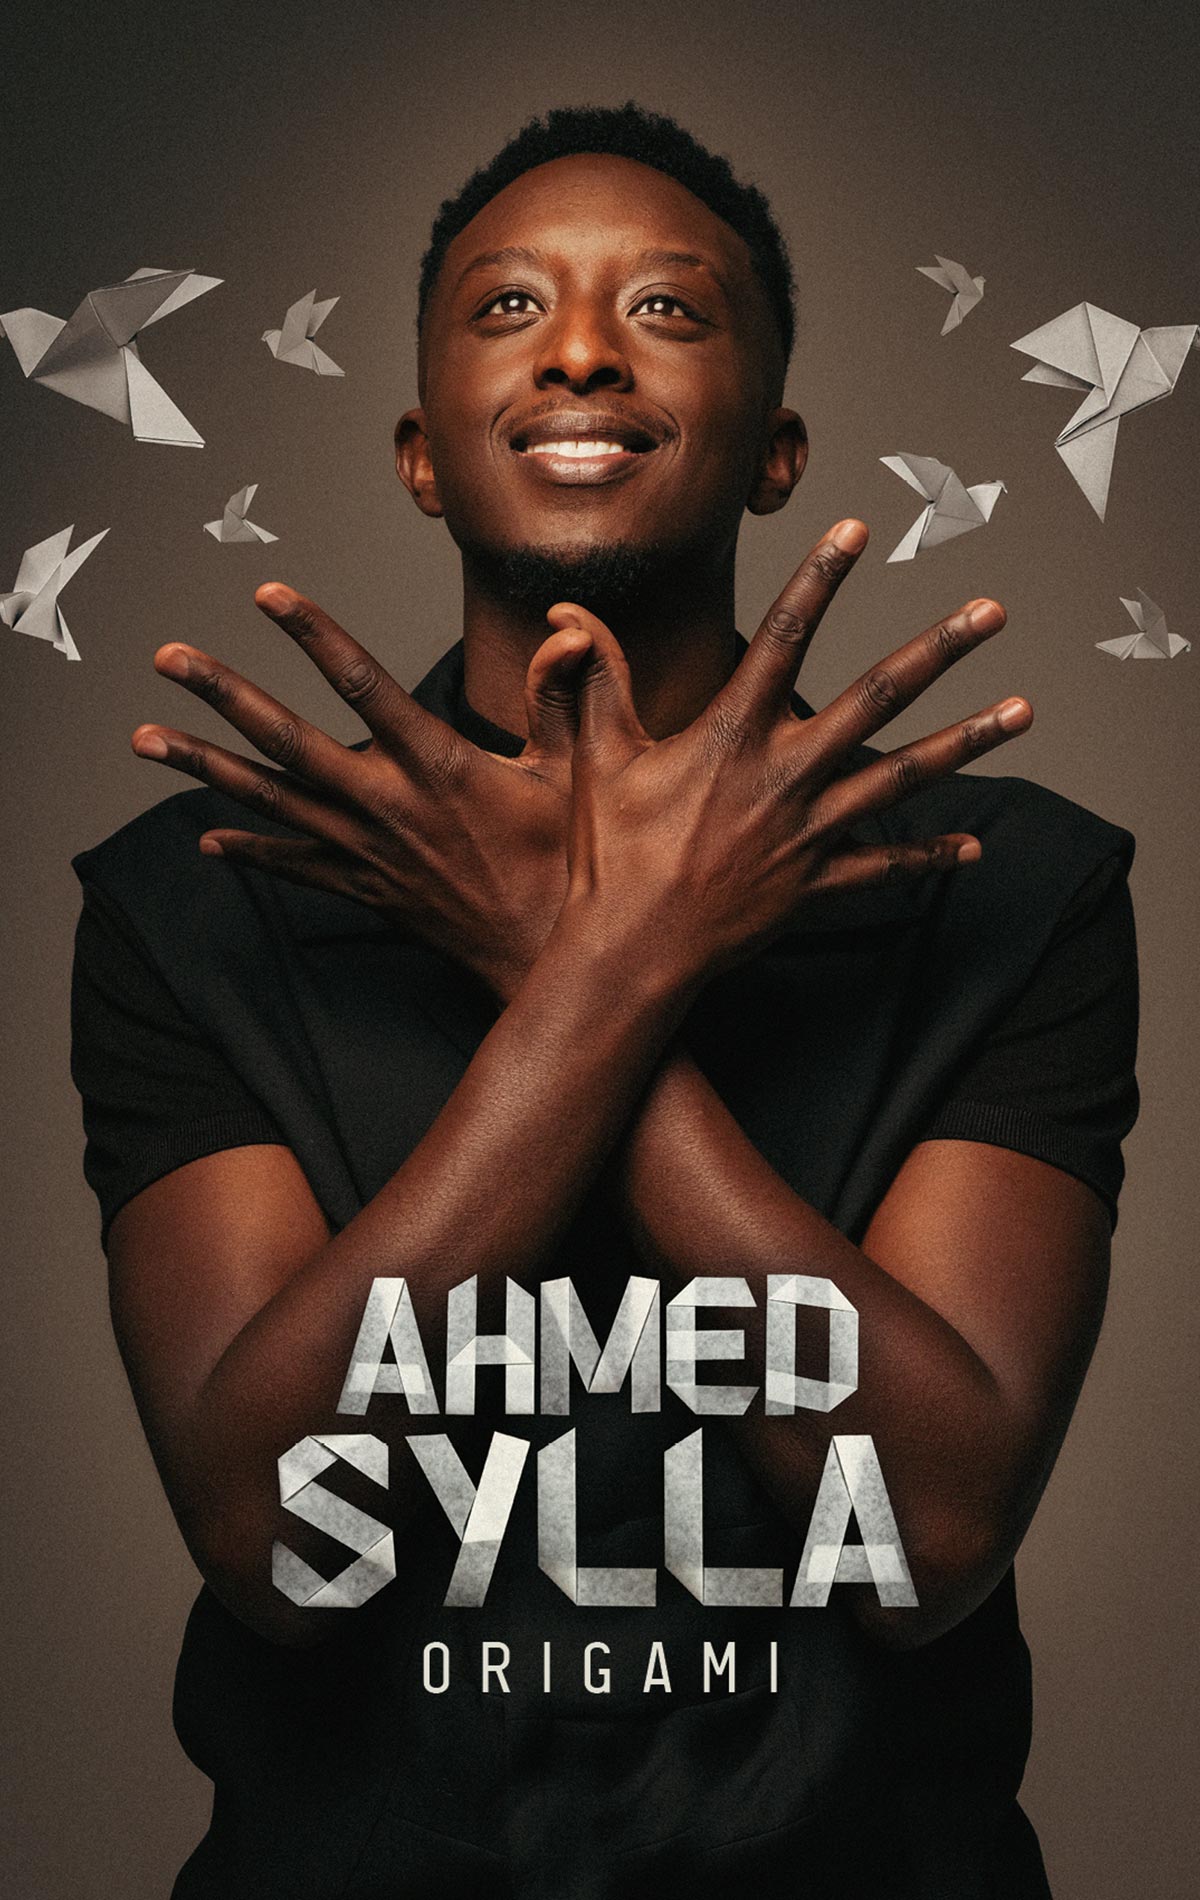 Billets Ahmed Sylla (Le Scarabee Roanne - Riorges)